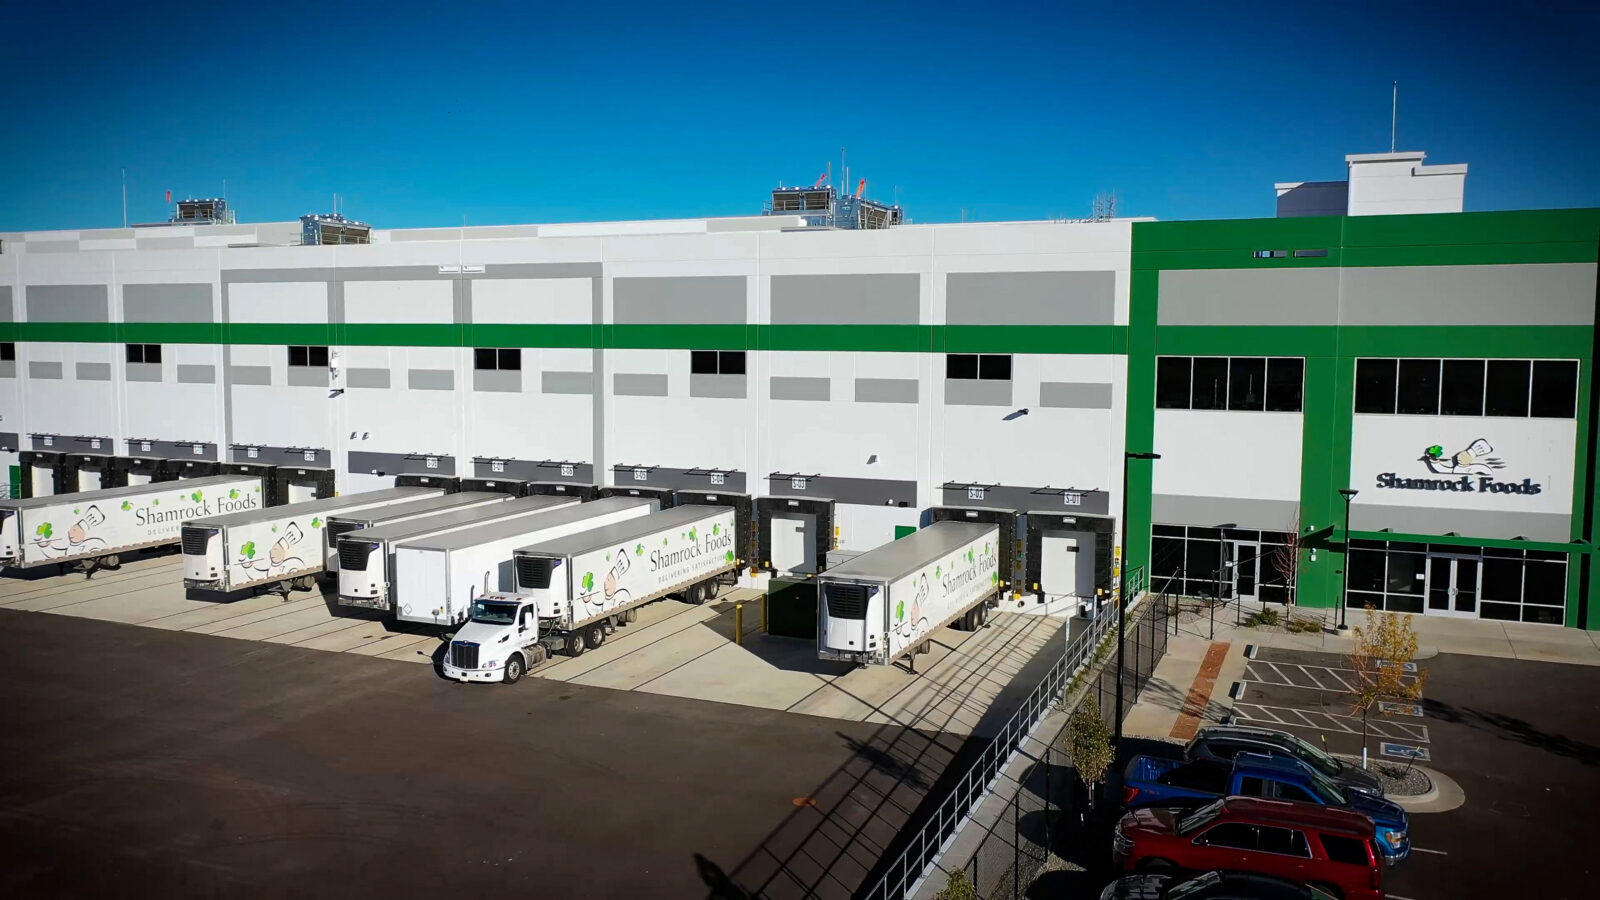 A Shamrock Foods warehouse exterior with several tractor trailers.